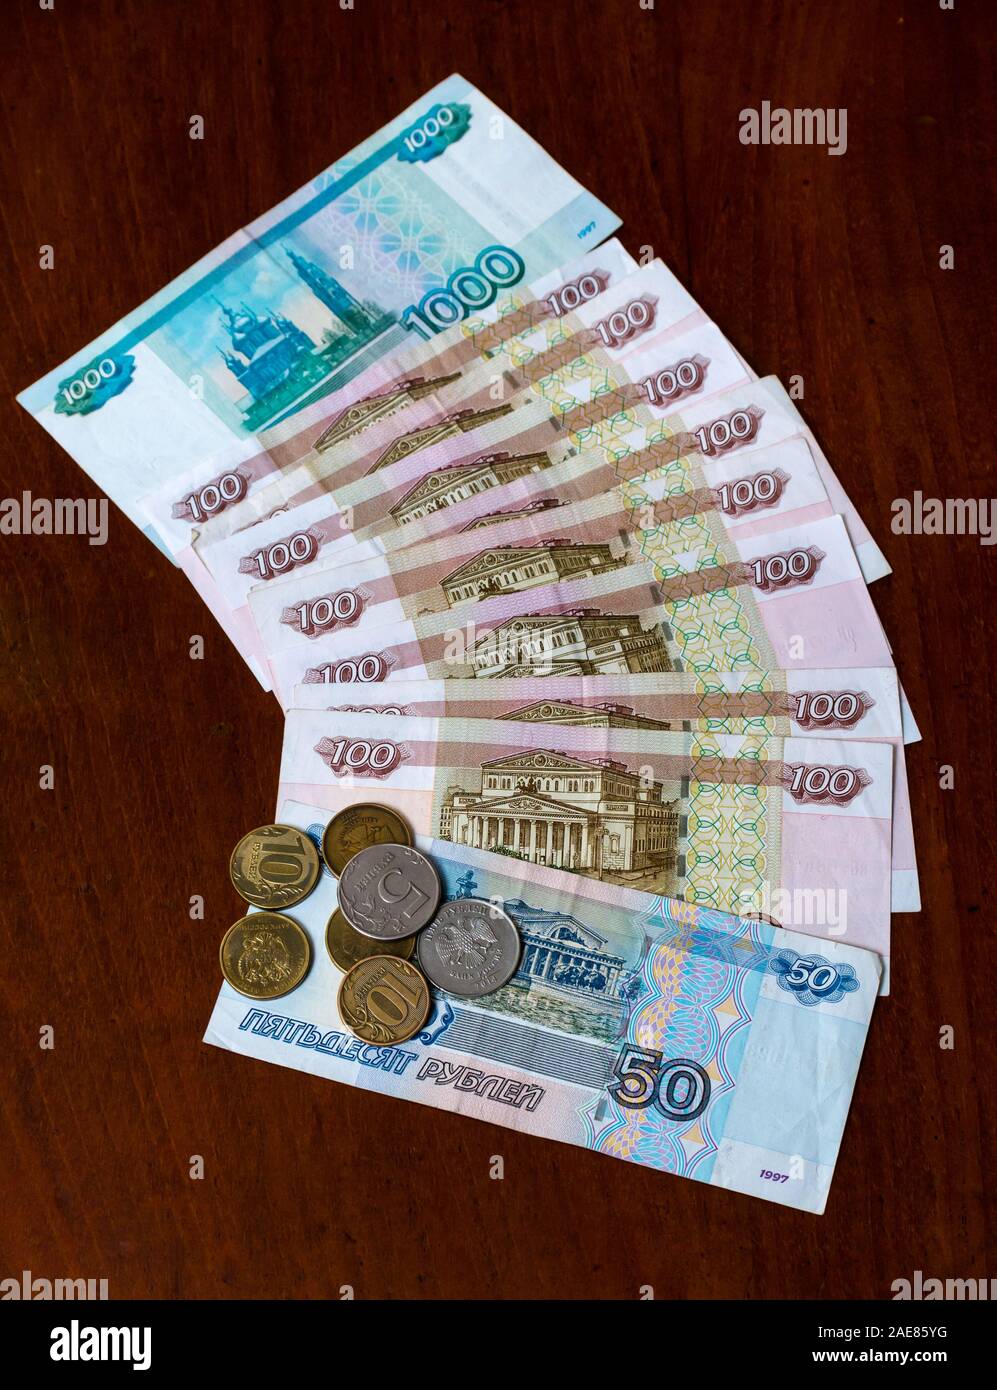 Russian rouble or ruble banknotes & coins with one thousand (1000) one hundred (100) and fifty (50) roubles Stock Photo